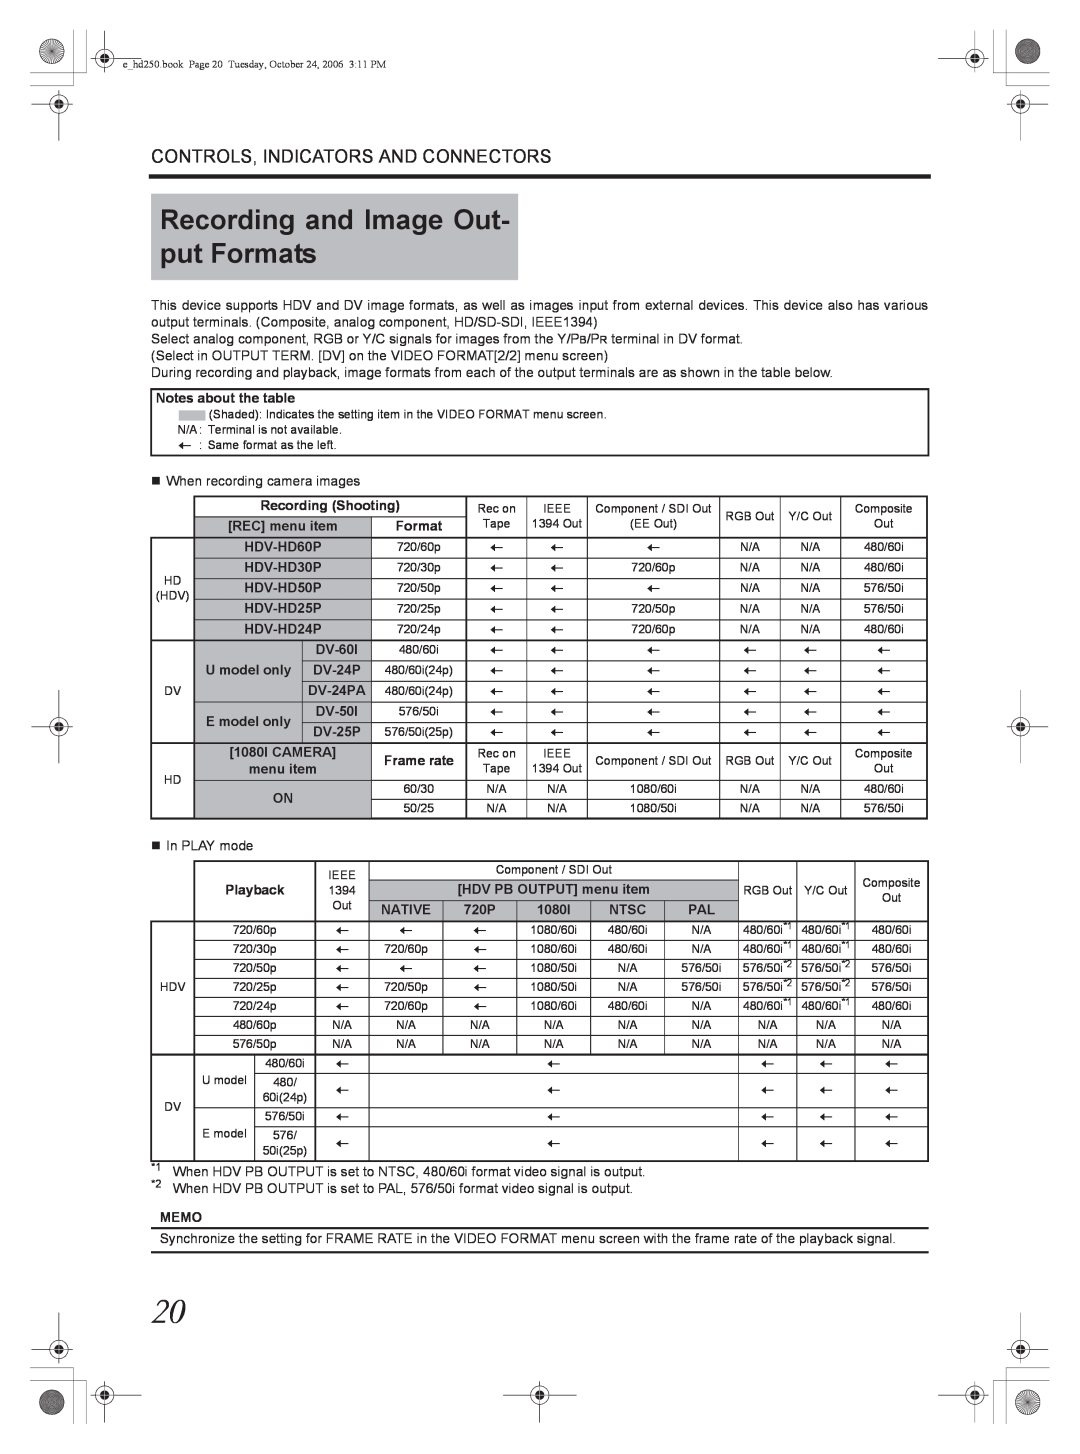 JVC GY-HD250 Recording and Image Out- put Formats, Notes about the table, Recording Shooting, REC menu item, HDV-HD60P 